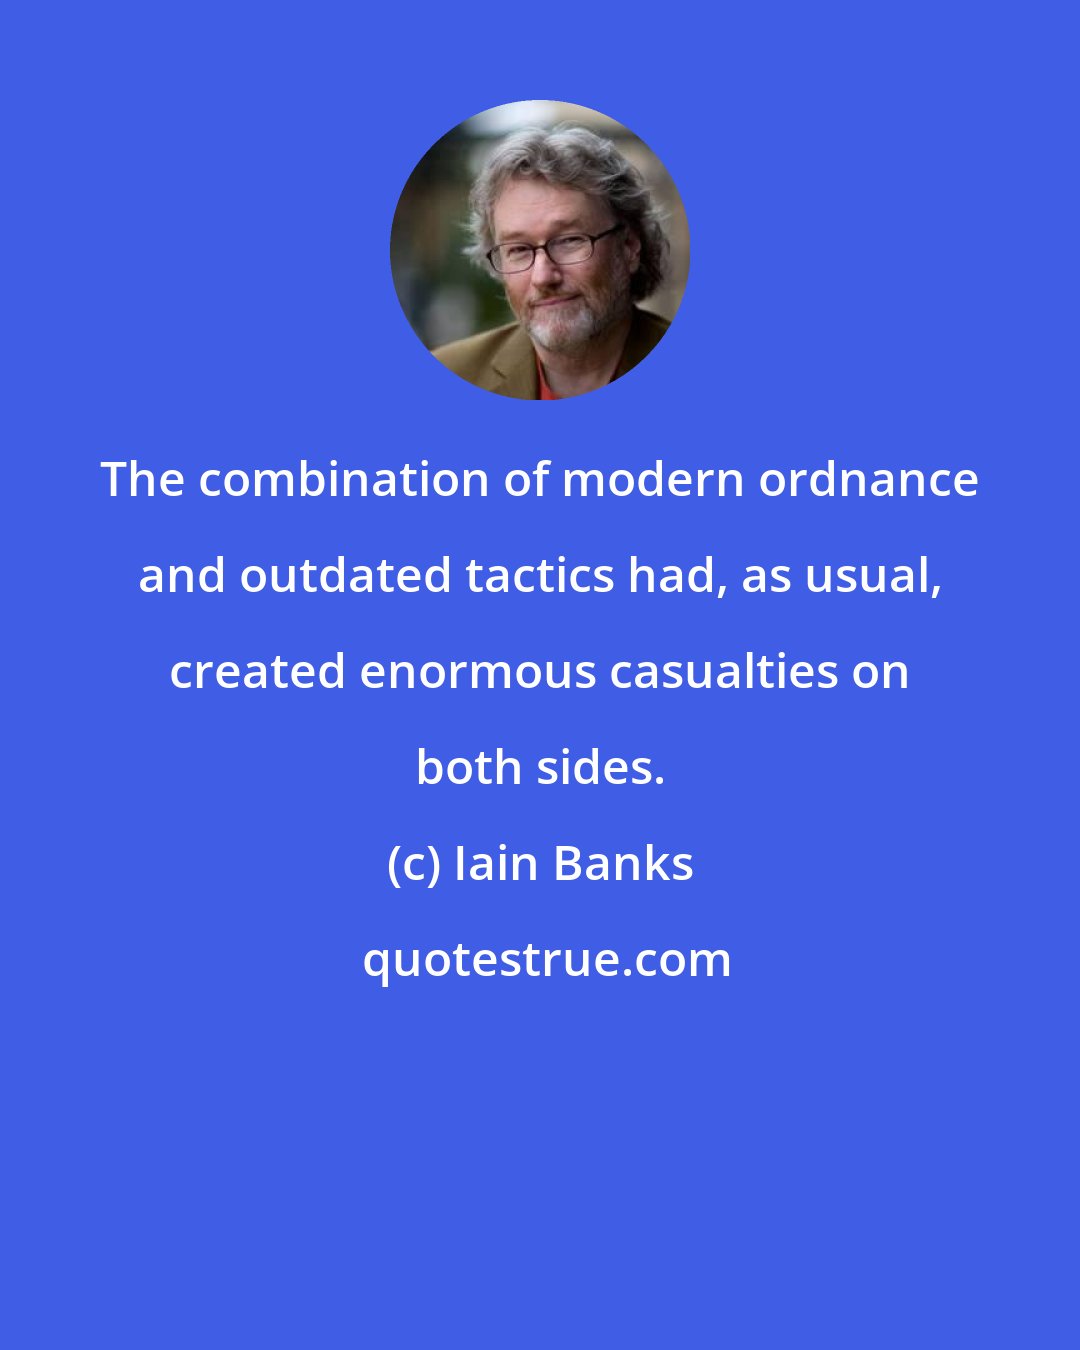 Iain Banks: The combination of modern ordnance and outdated tactics had, as usual, created enormous casualties on both sides.